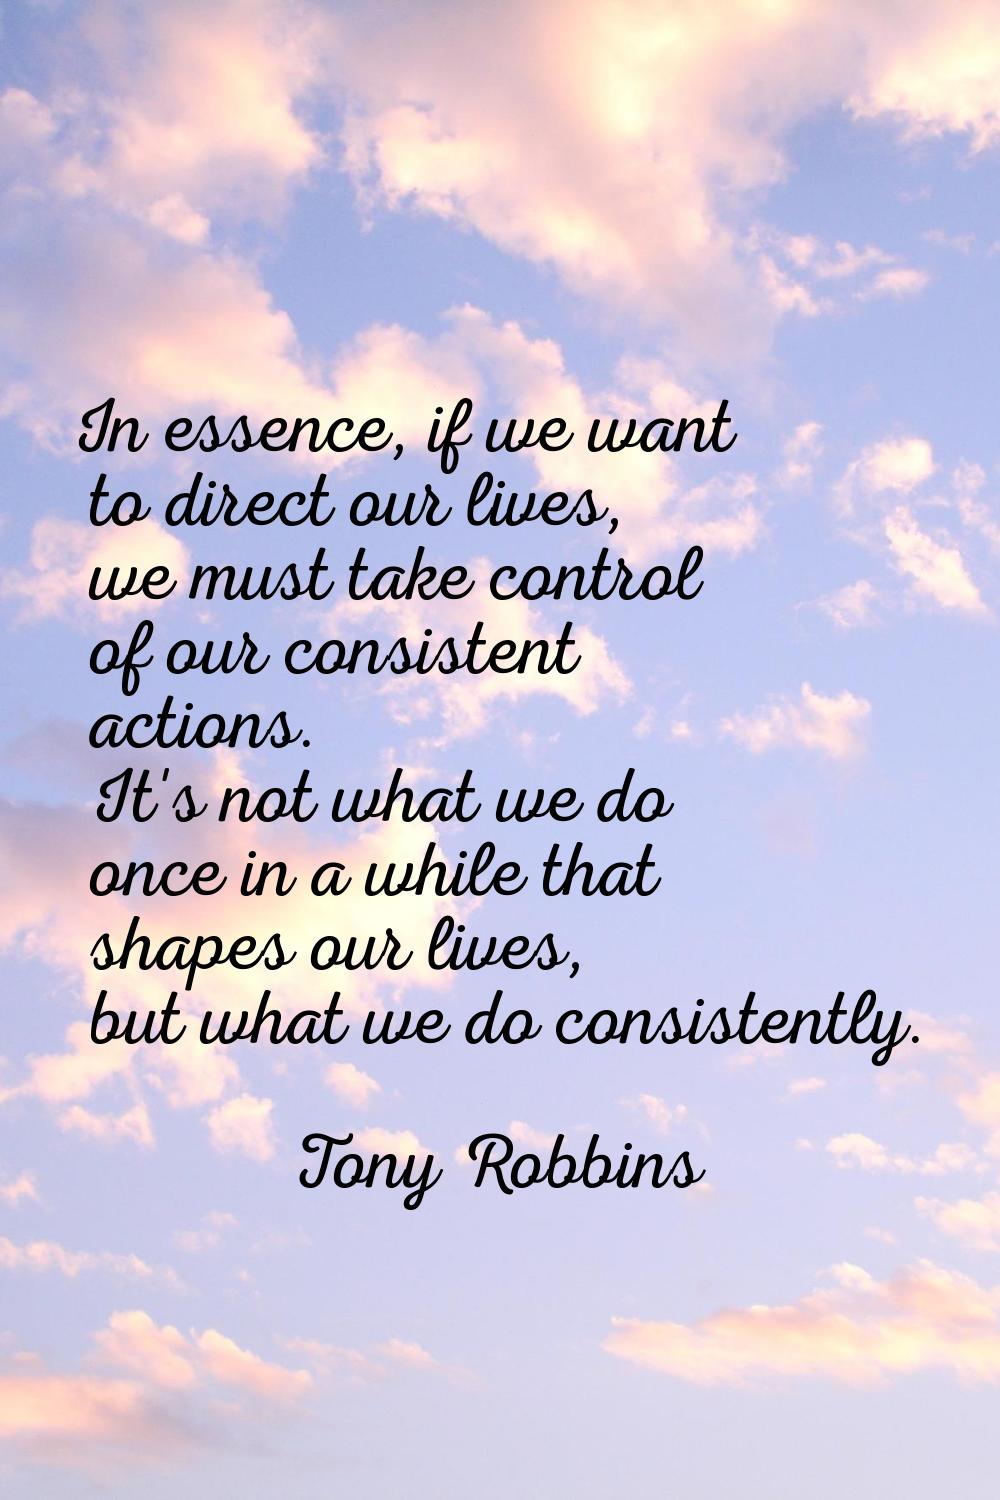 In essence, if we want to direct our lives, we must take control of our consistent actions. It's no